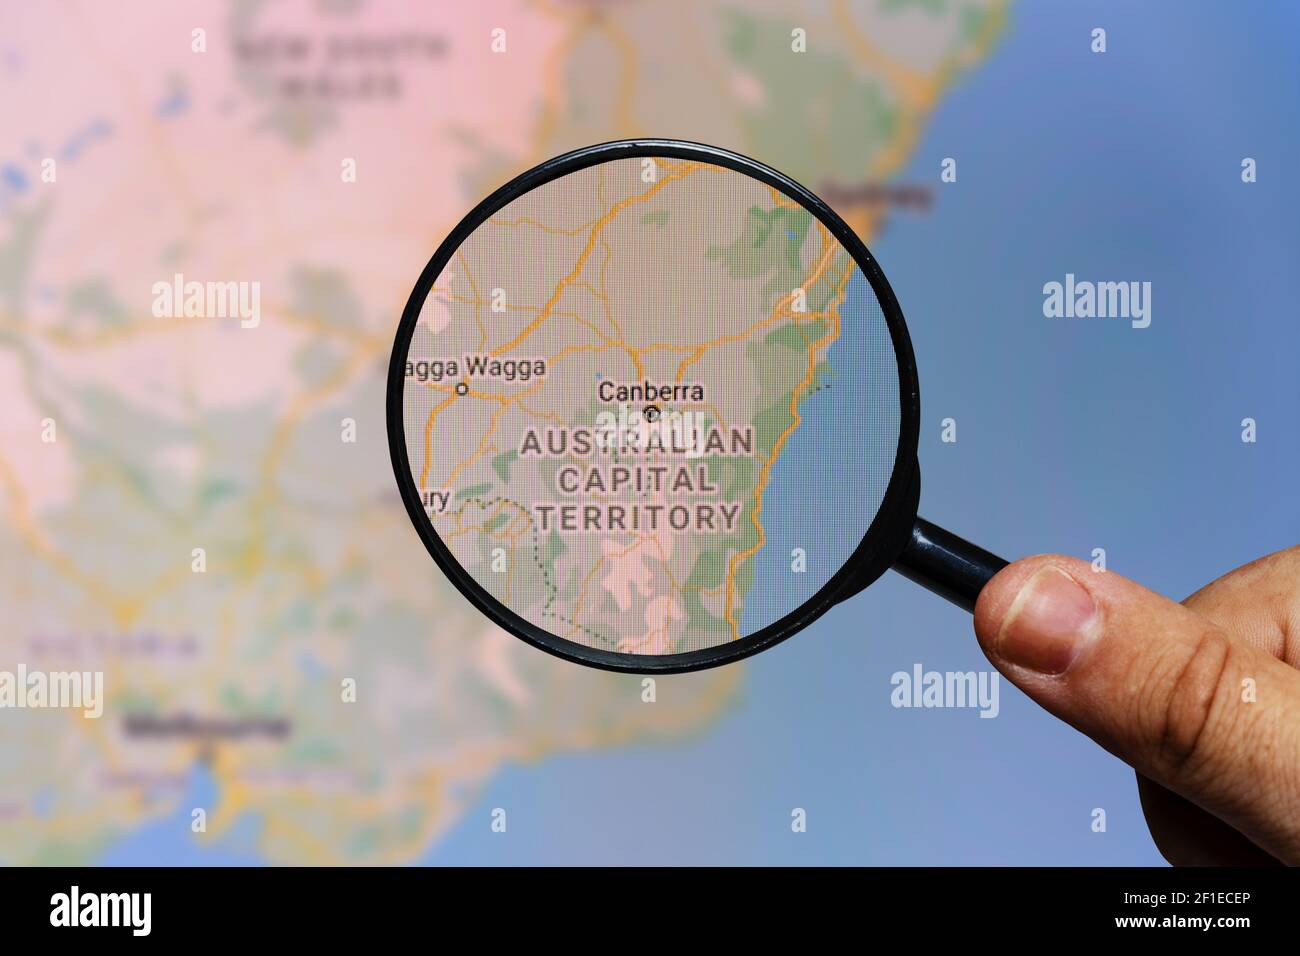 Moscow, Russia - March 07, 2021: Canberra city in Australia on a monitor screen through a magnifying glass. Stock Photo